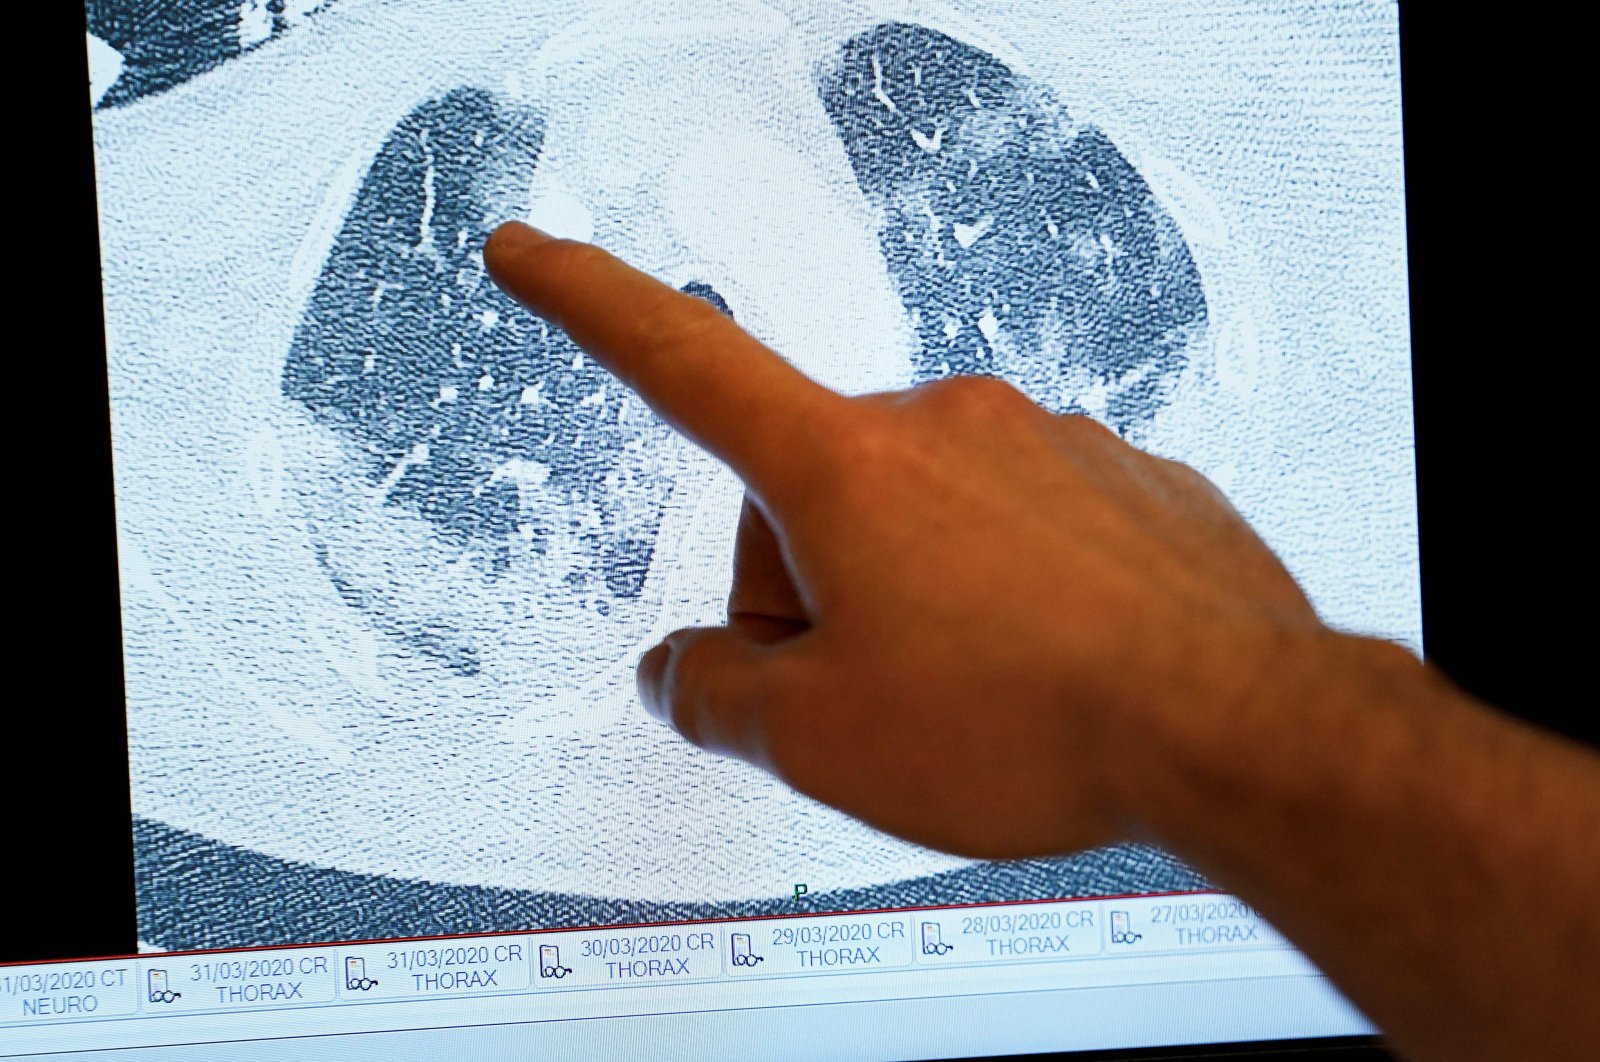 A doctor shows on screen the scan of the lungs of a patient infected by the COVID-19, at the "middle care" unit for COVID-19 patients at Erasme Hospital in Brussels, on April 30, 2020. (AFP Photo)